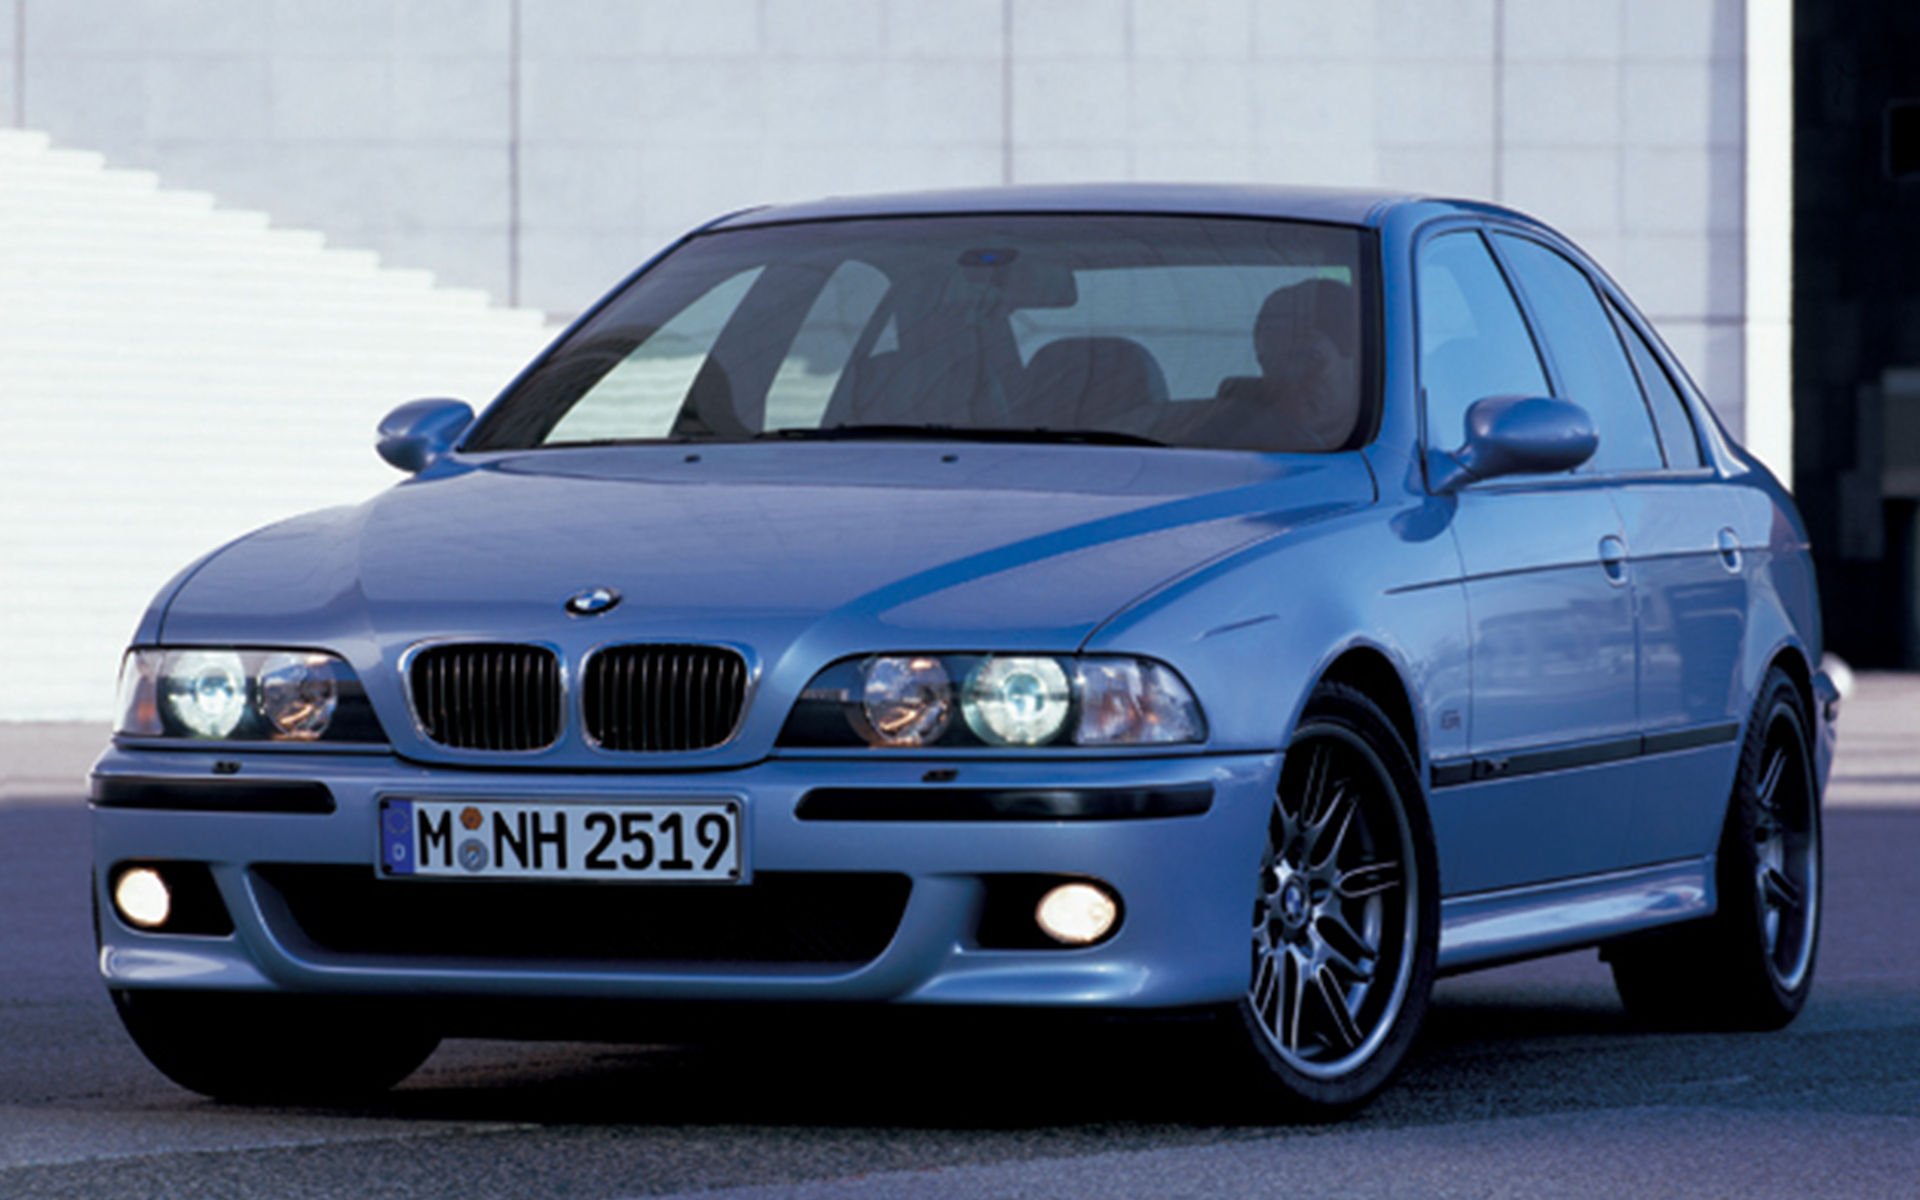 The BMW M5 of 1998